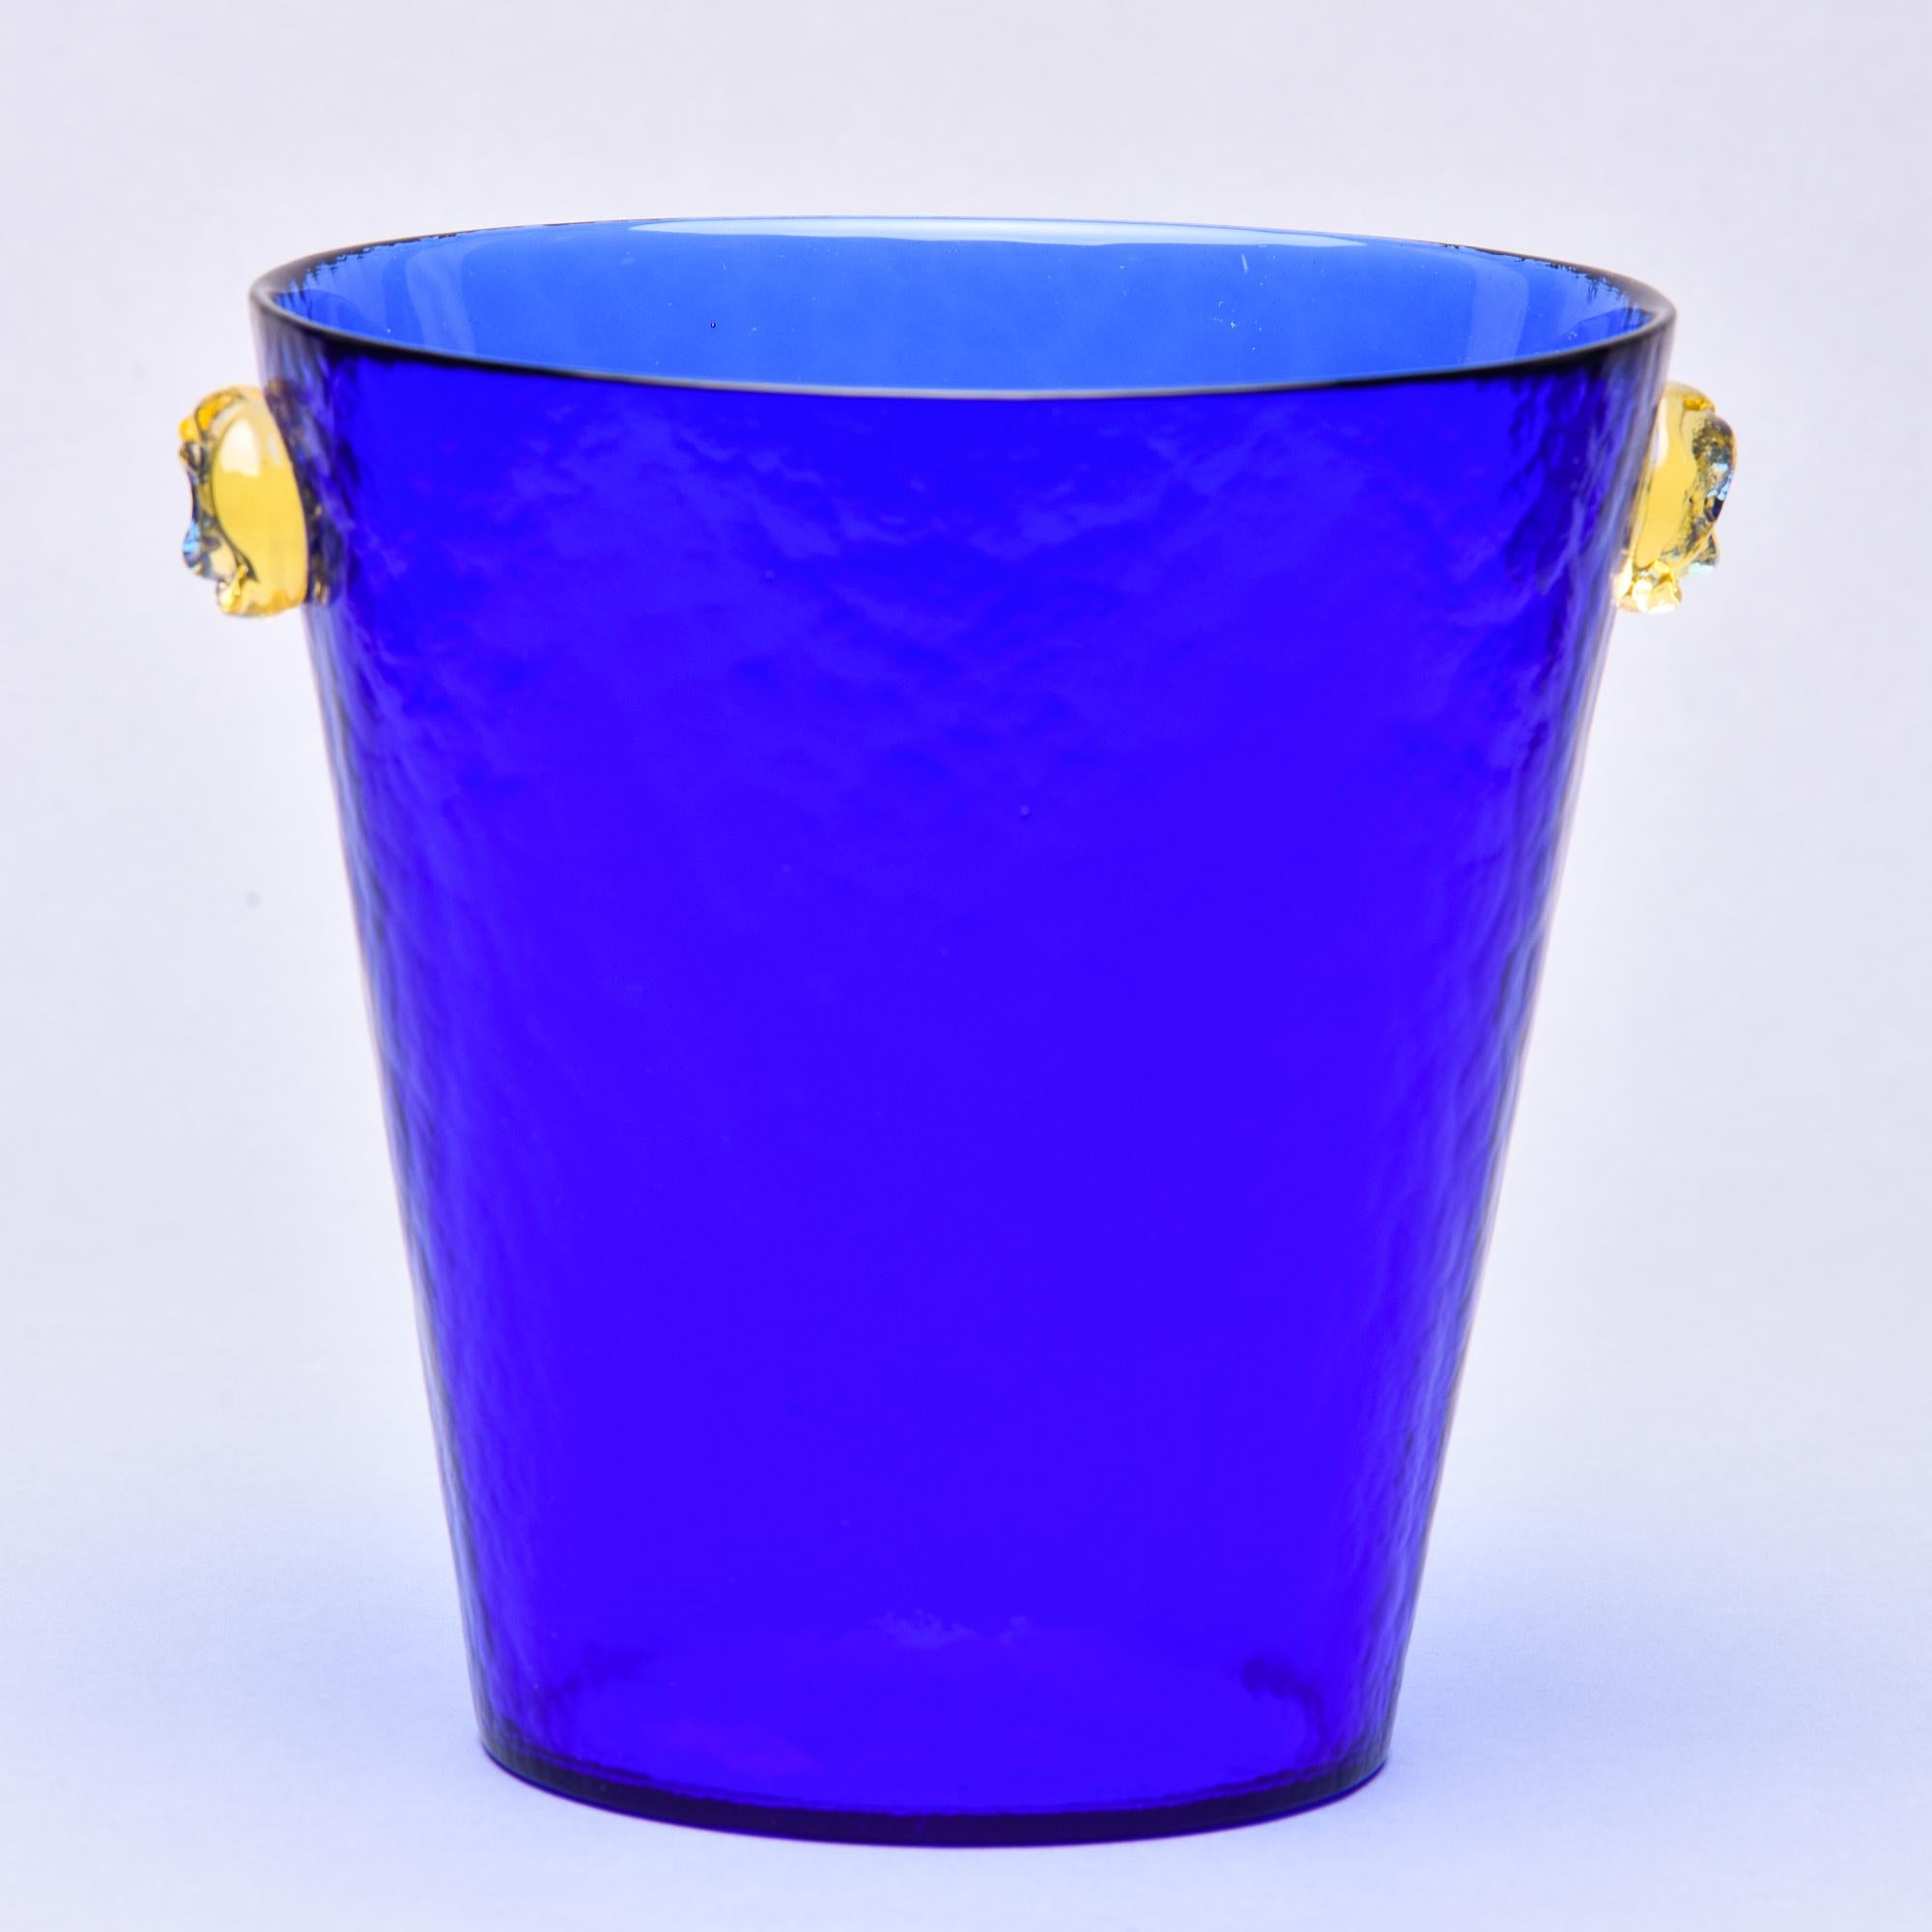 Found in Italy, this circa 1960s Murano glass ice bucket or wine cooler in deep blue has contrasting gold handles at the sides. Acid etched maker’s mark on underside of base: Ca dei Vetrai Murano. No flaws found. Two available at the time of this